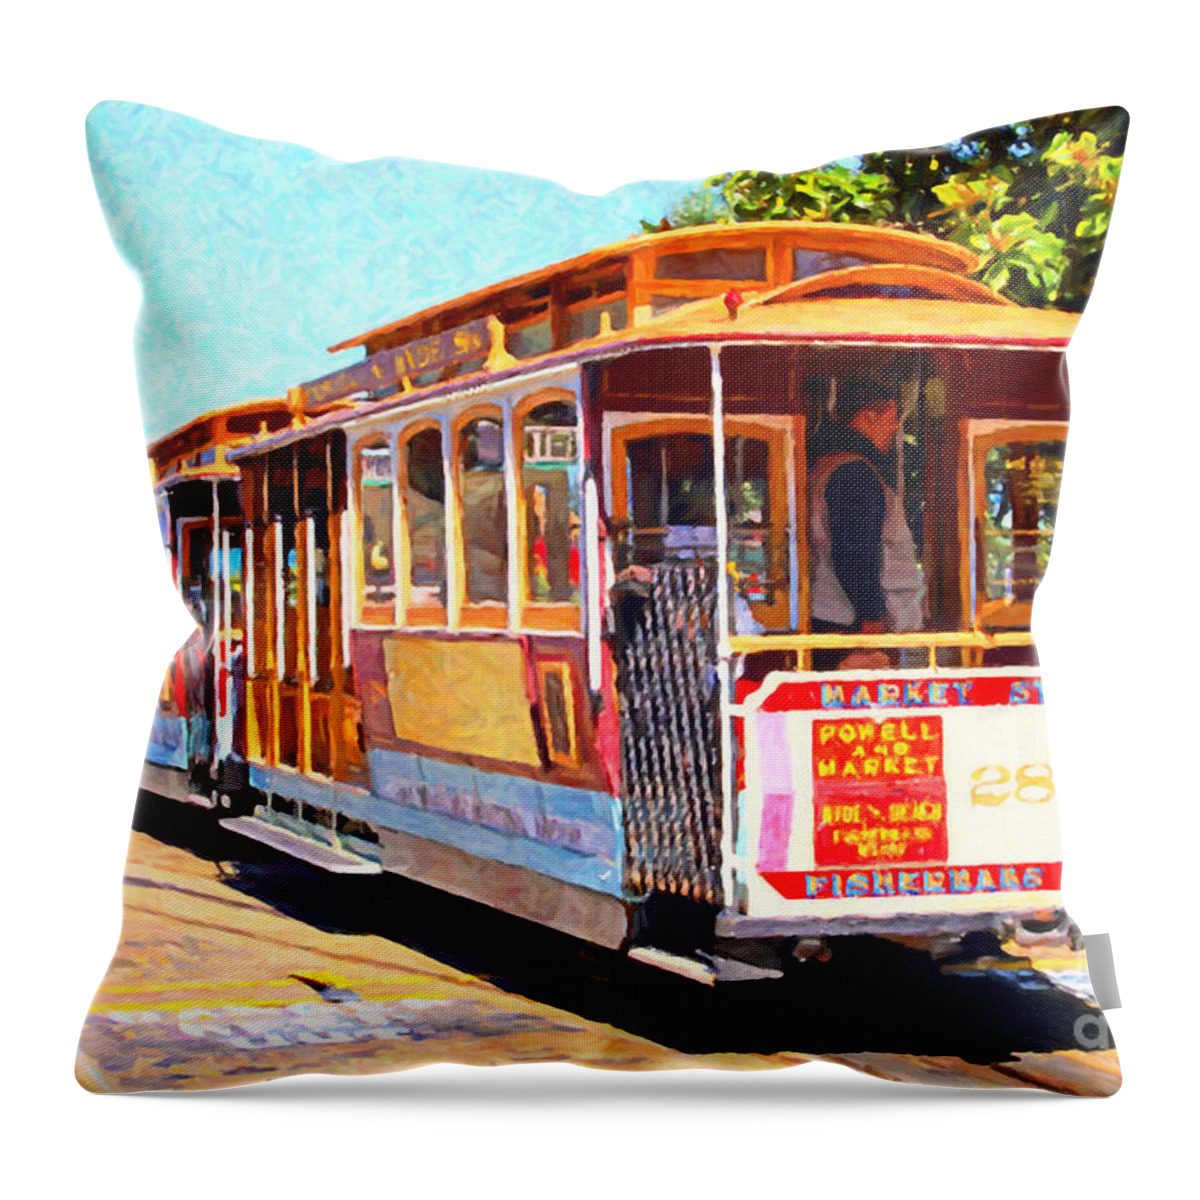 San Francisco Throw Pillow featuring the photograph San Francisco Cablecar At Fishermans Wharf . 7D14097 by Wingsdomain Art and Photography